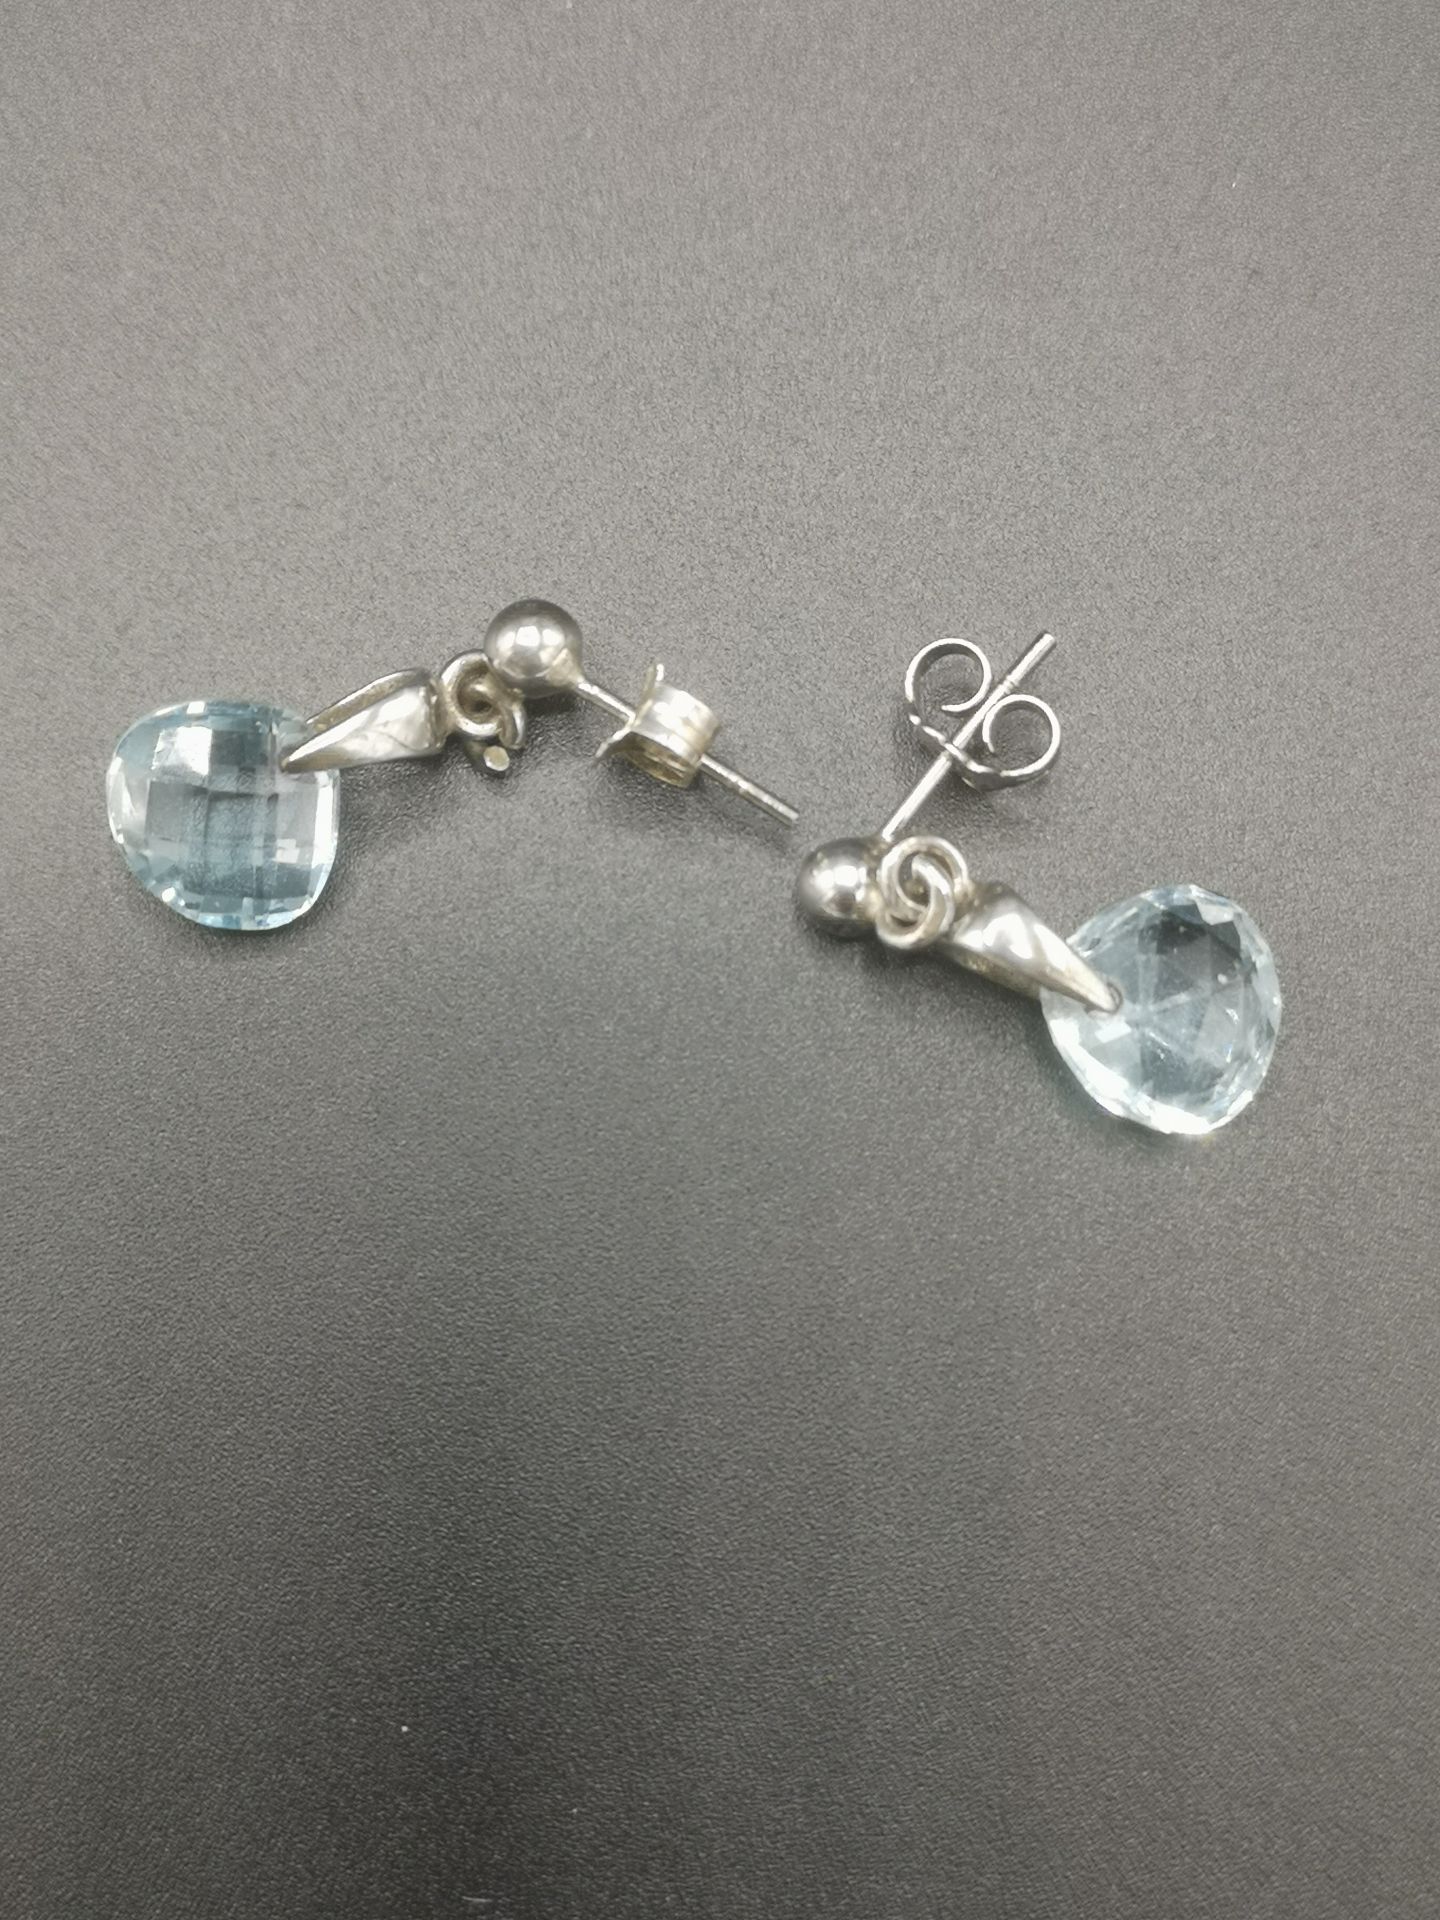 Pair of silver and topaz earrings - Image 3 of 4